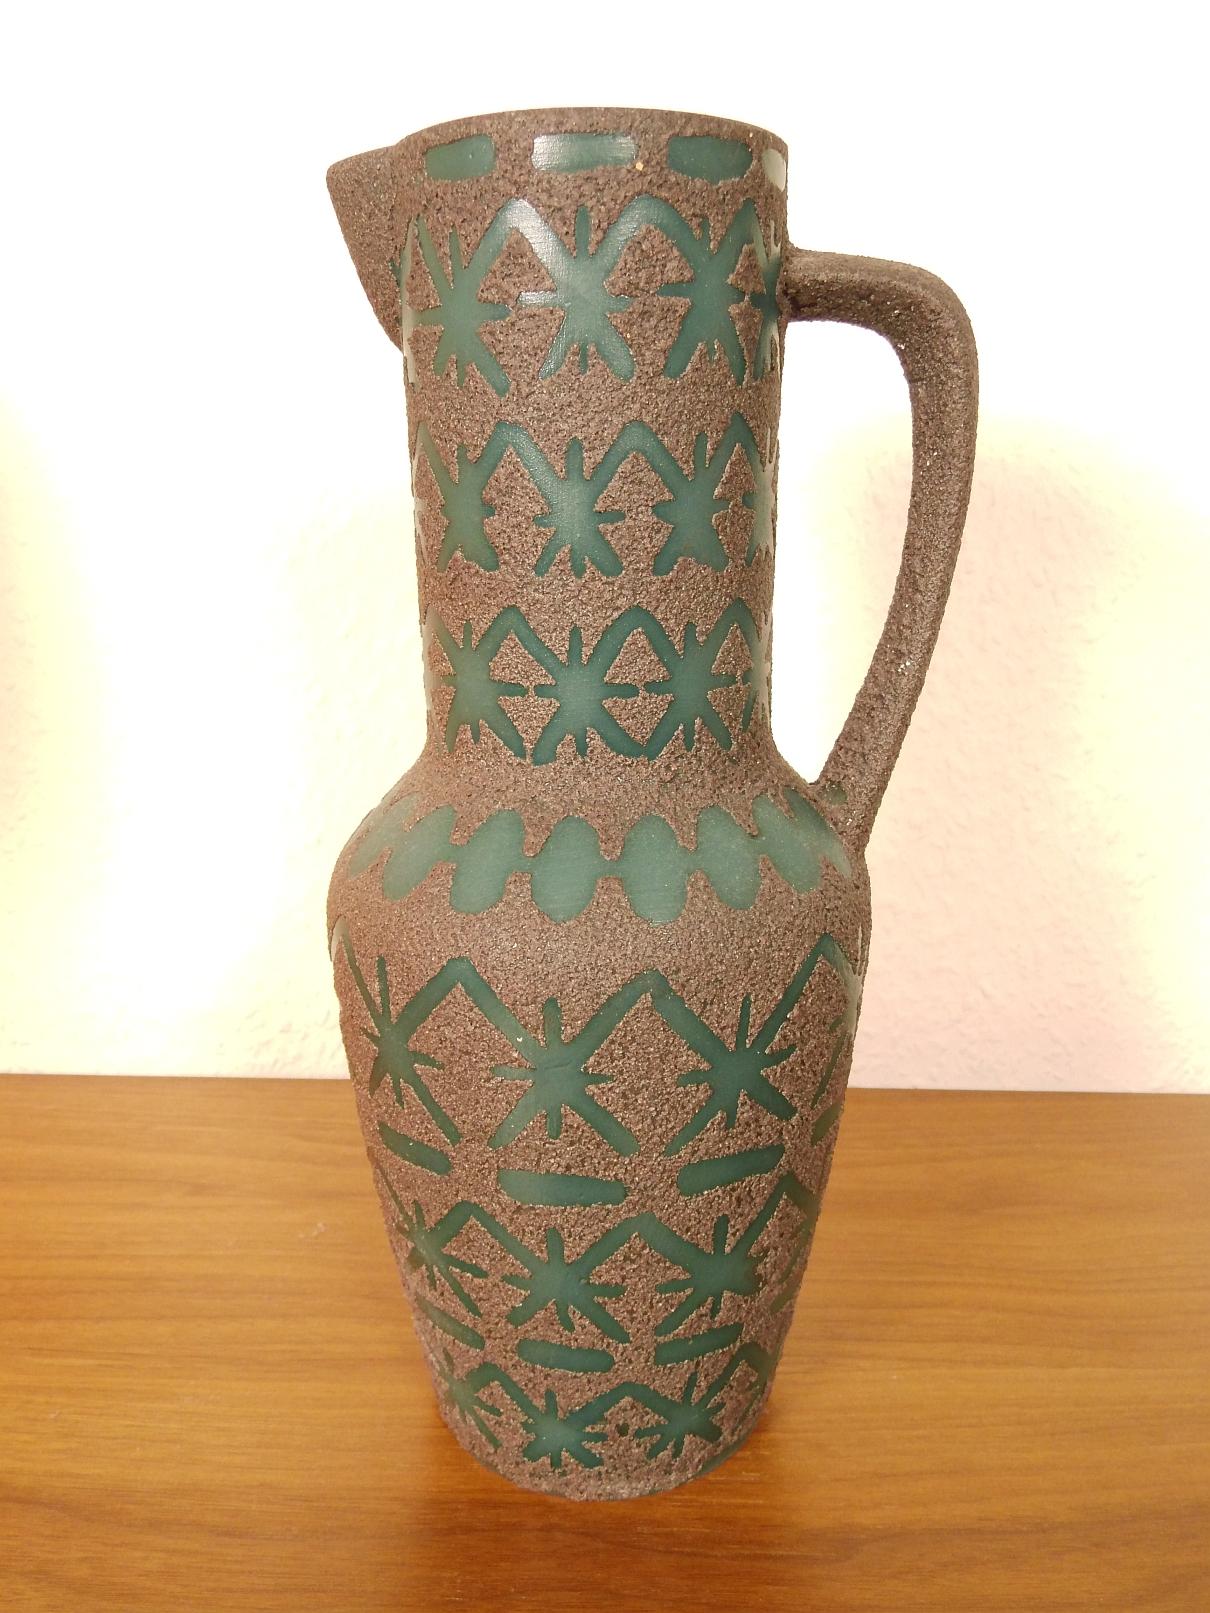 Beautiful pottery vase from Germany.
Manufacturer: Ceramano Rustica

Rare and special Lava Glazing.

Handmade.
Very well preserved. In one place the lava glaze is cut out. see photo.
For larger bouquets: 30 cm / 11.81 inch high.
